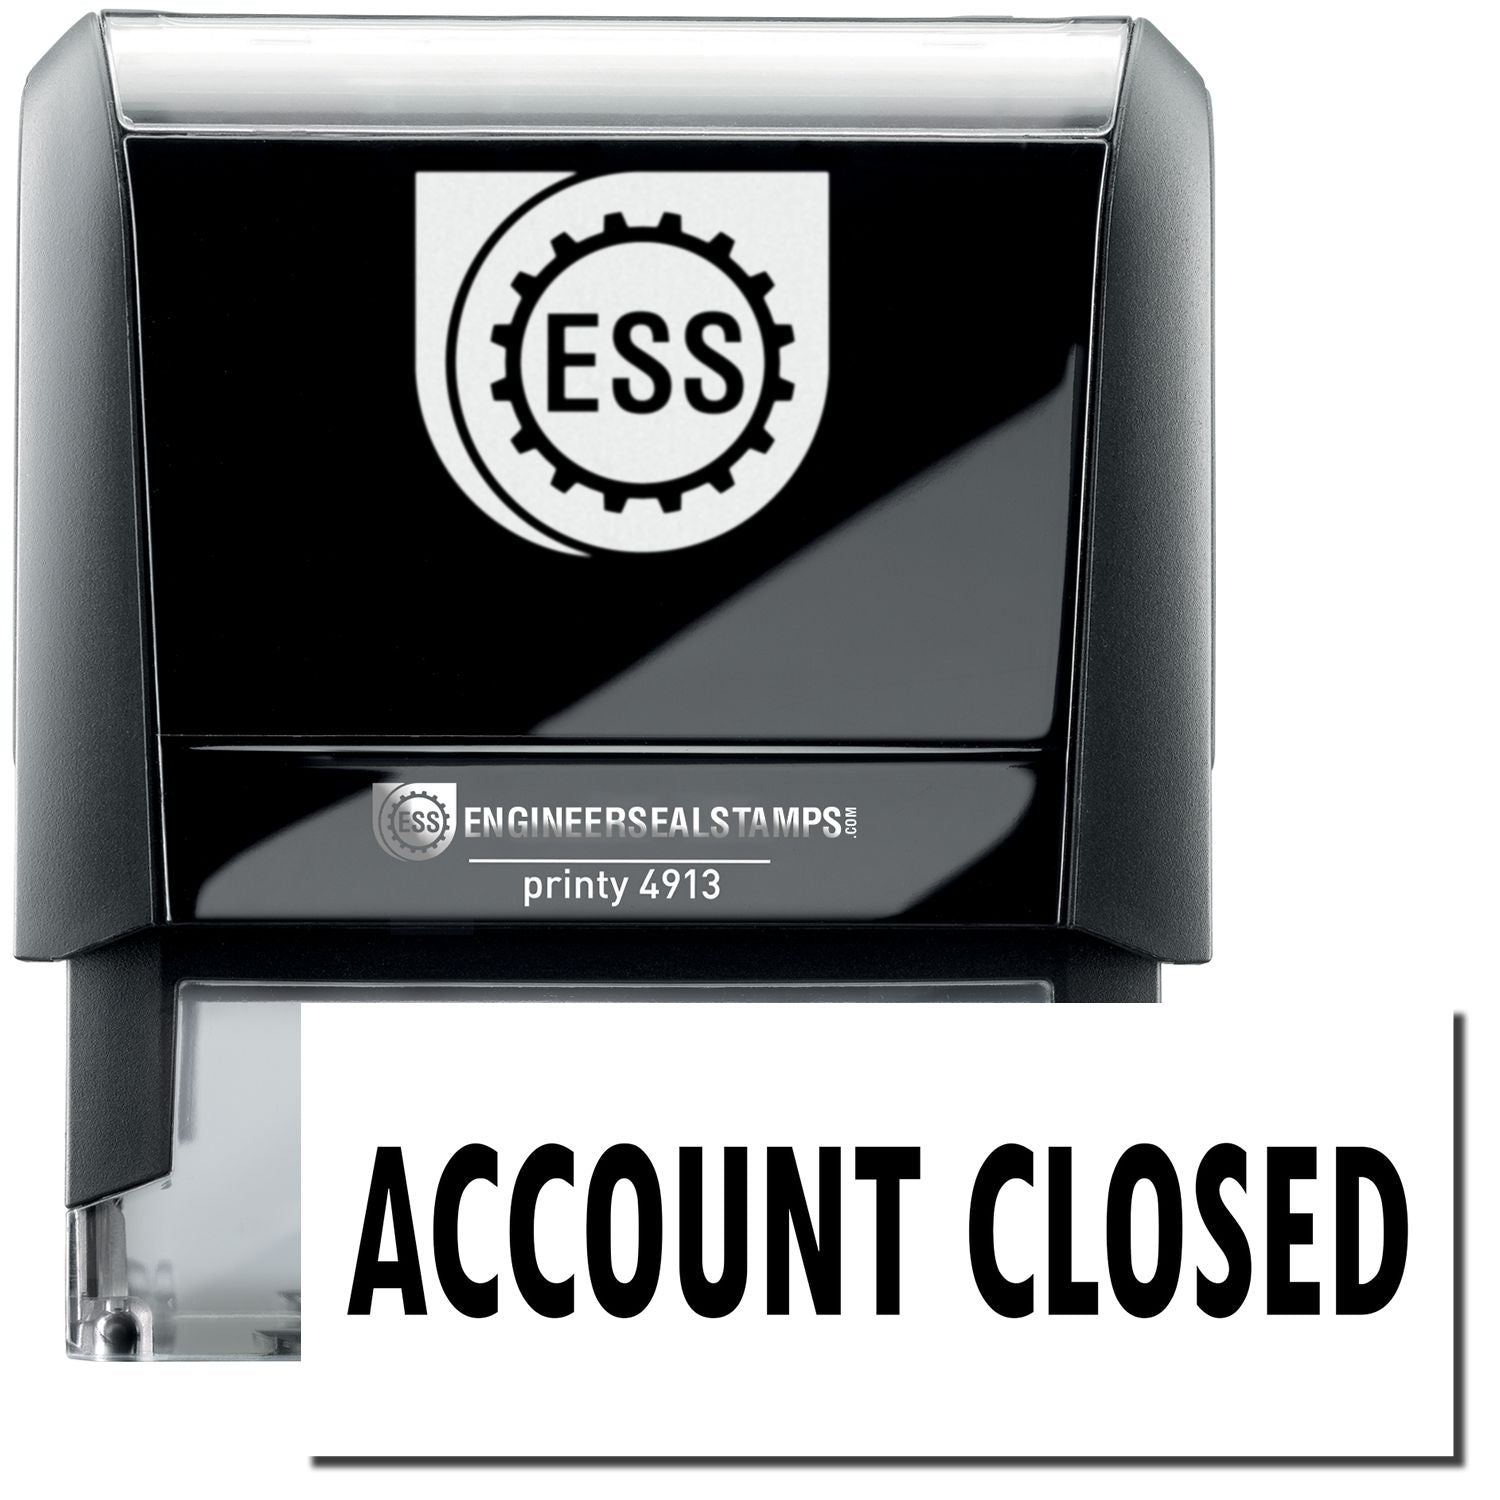 Large Self-Inking Account Closed Stamp showing how "ACCOUNT CLOSED" message (in large font) display by this self-inking stamp